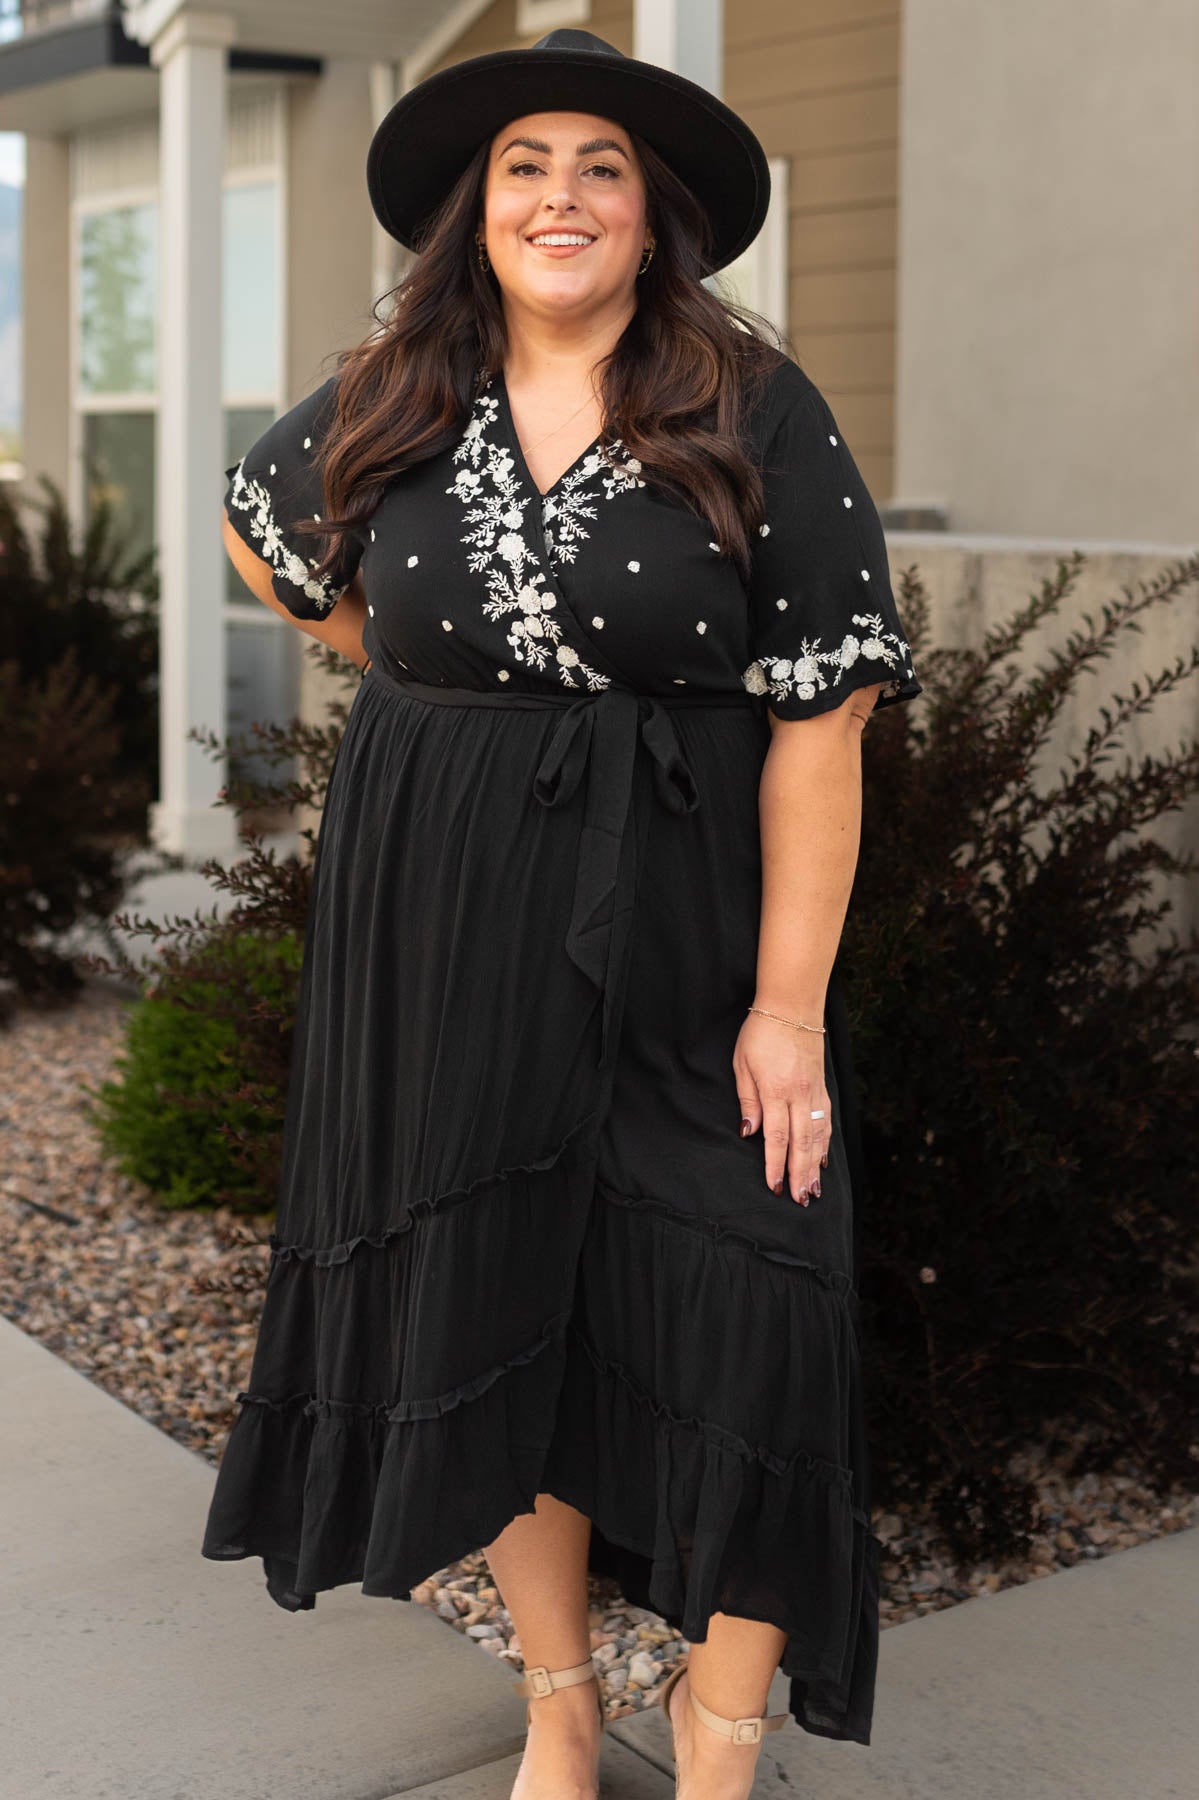 Plus size black floral dress that ties at the waist and has embroidery on the bodice